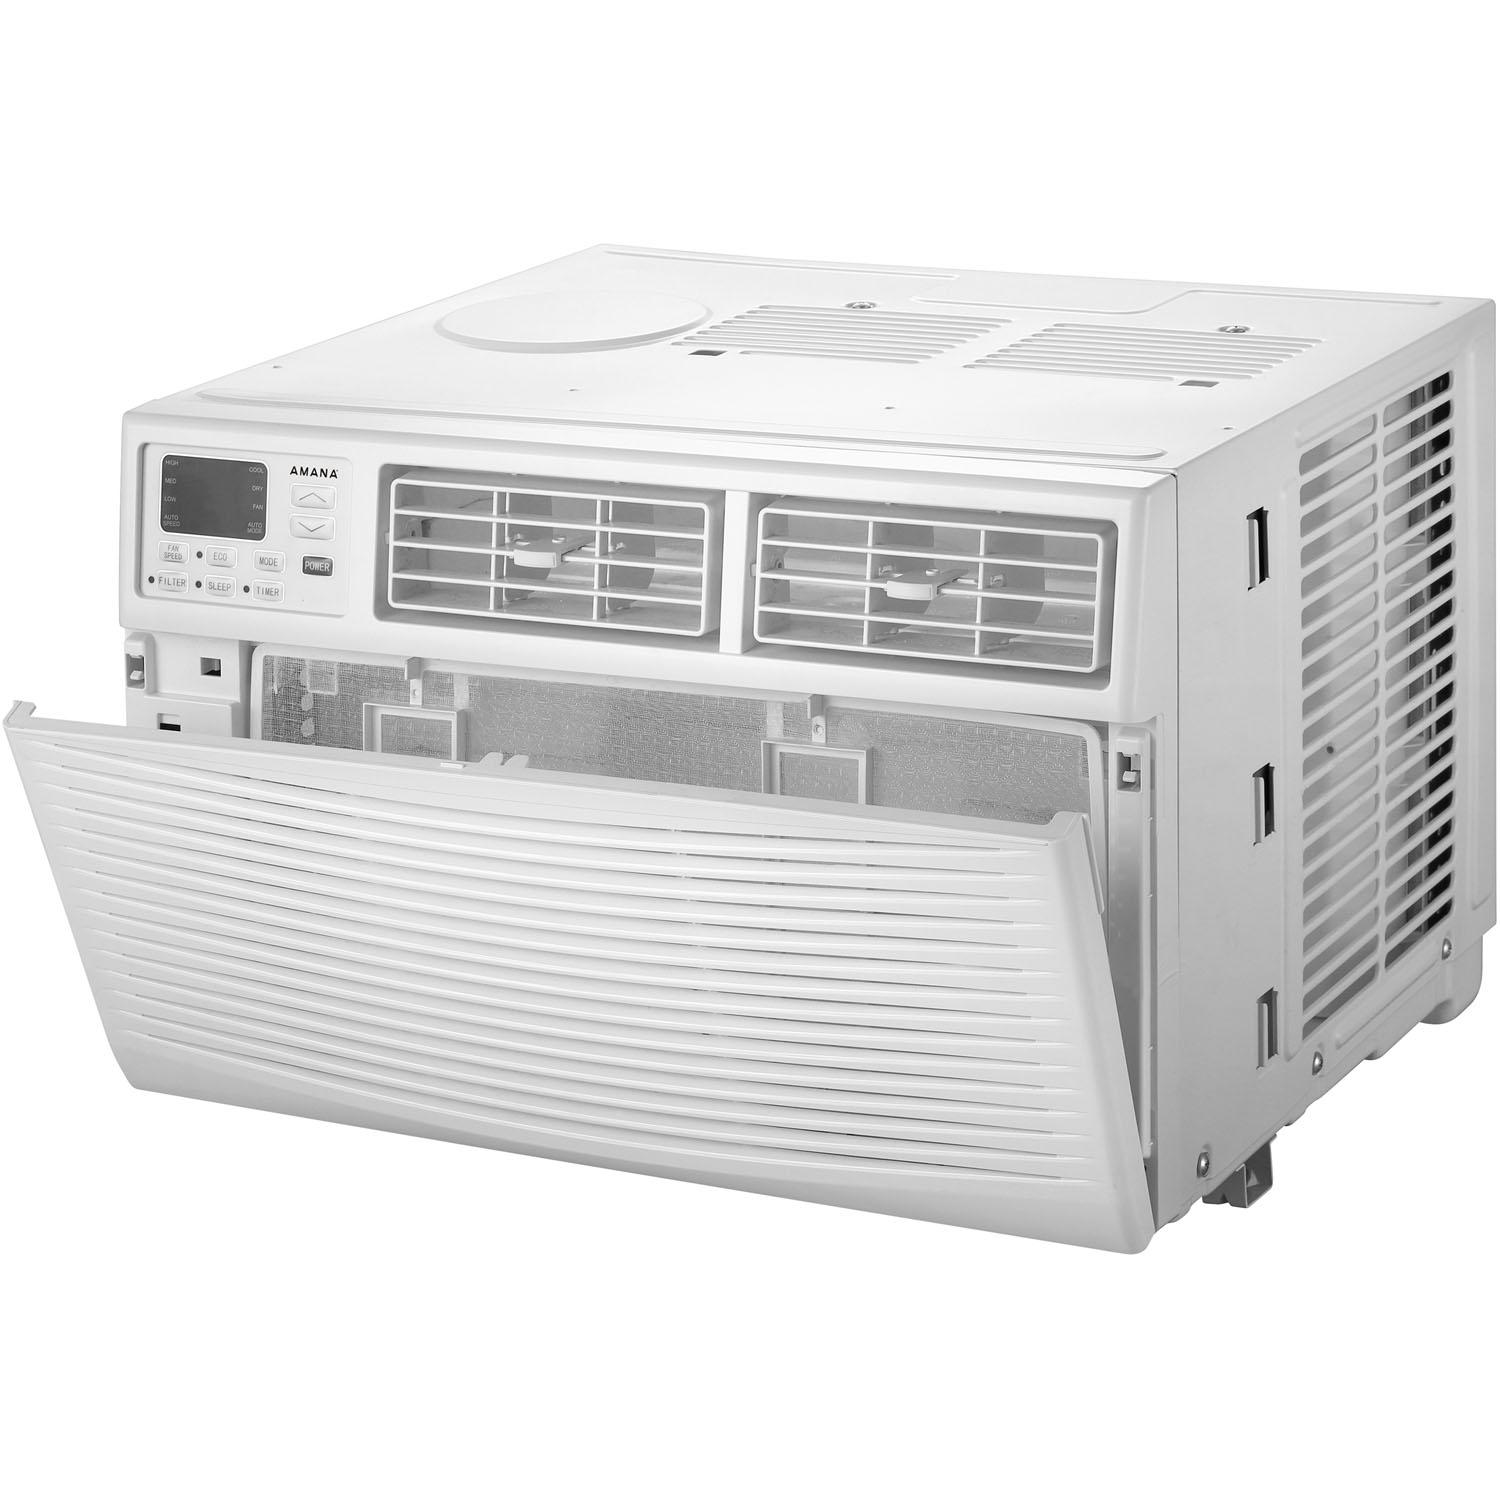 Amana AMAP101BW 10,000 BTU 115V Window-Mounted Air Conditioner with Remote Control - image 5 of 7